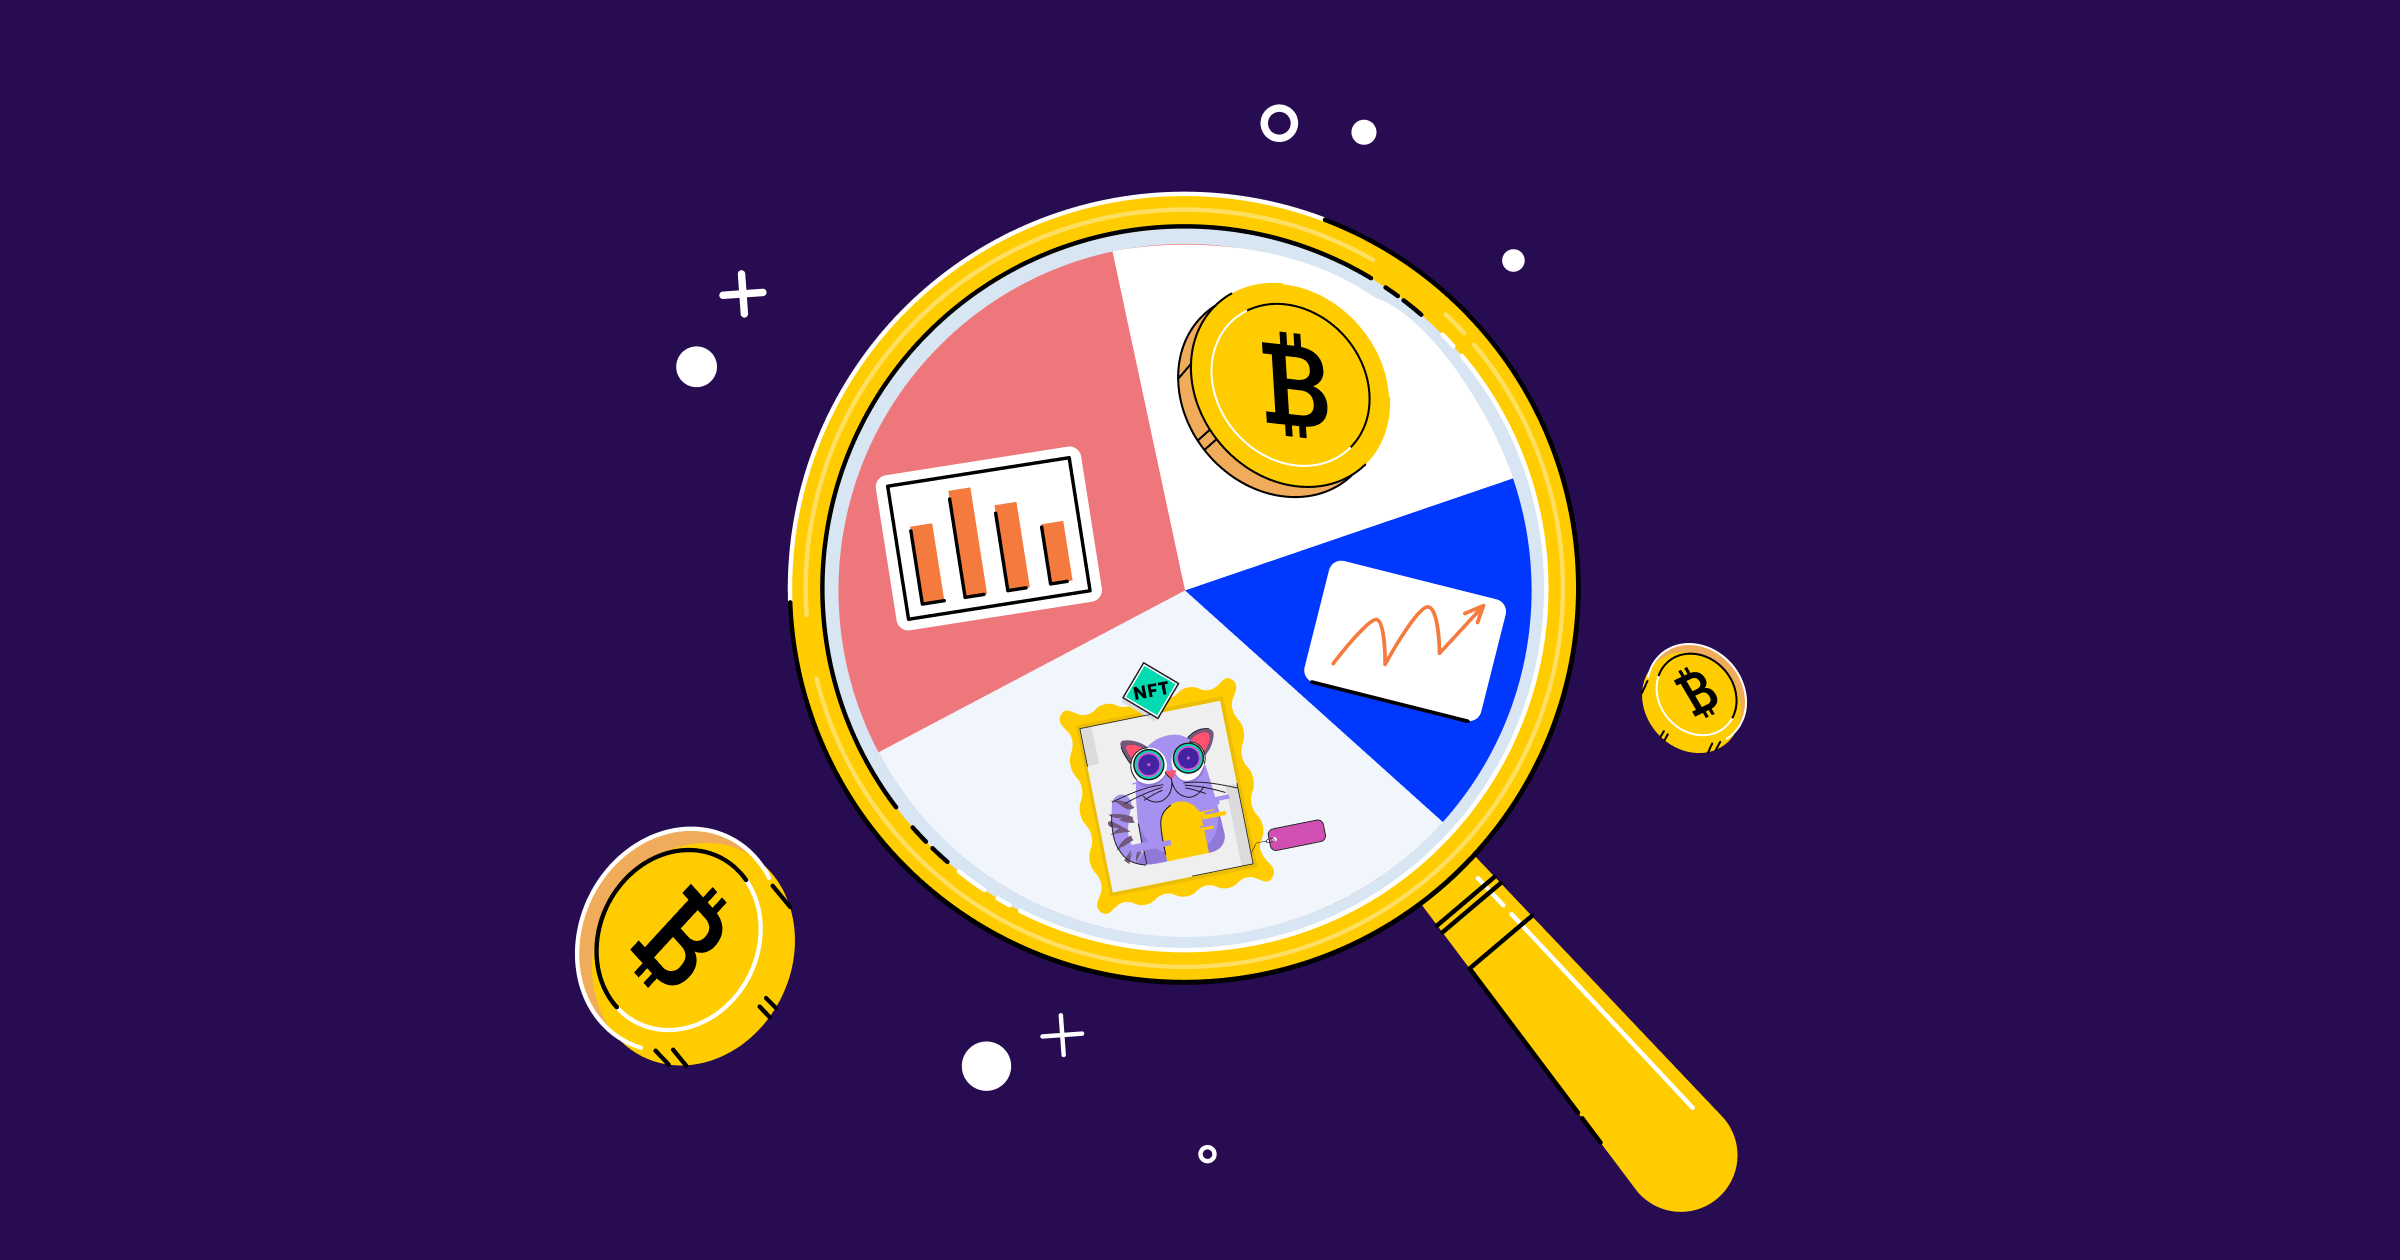 How to Do Your Own Research (DYOR) in Crypto